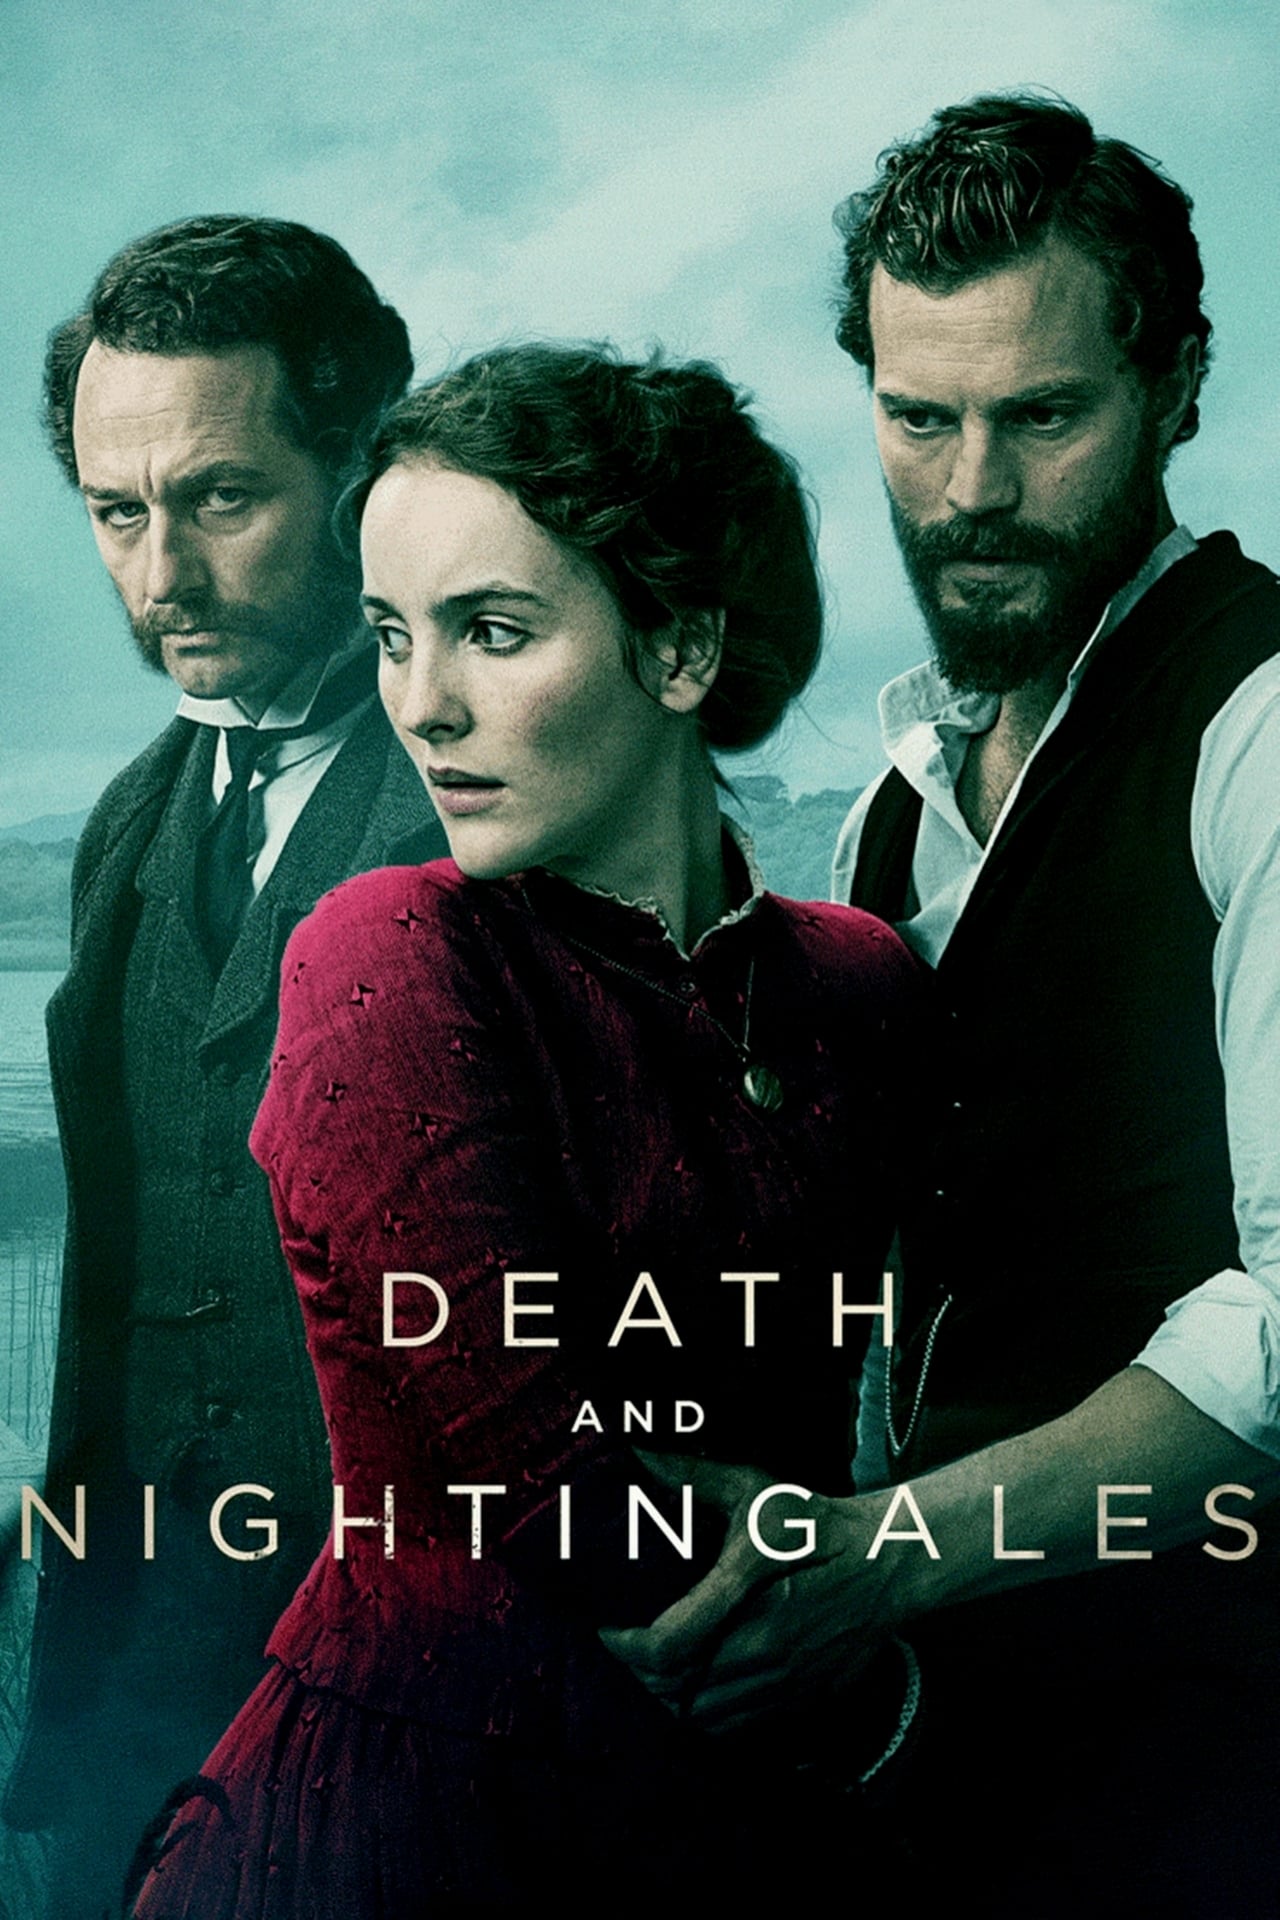 Death and Nightingales TV Shows About 19th Century